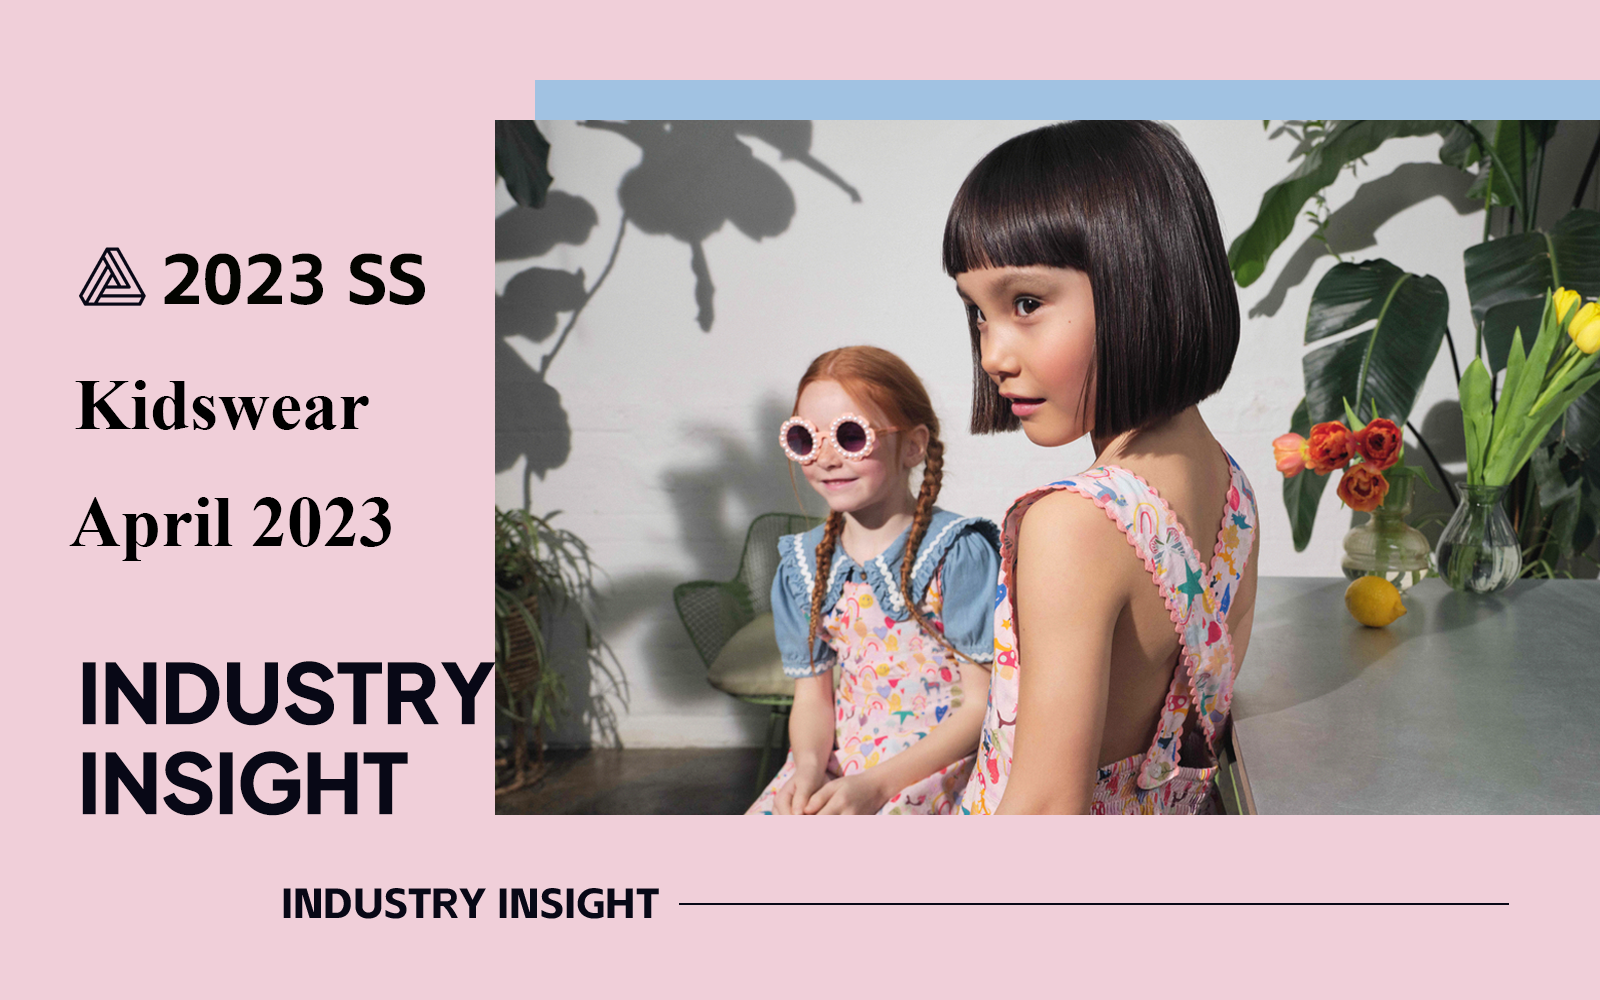 April 2023 -- The Industry Insight of Kidswear